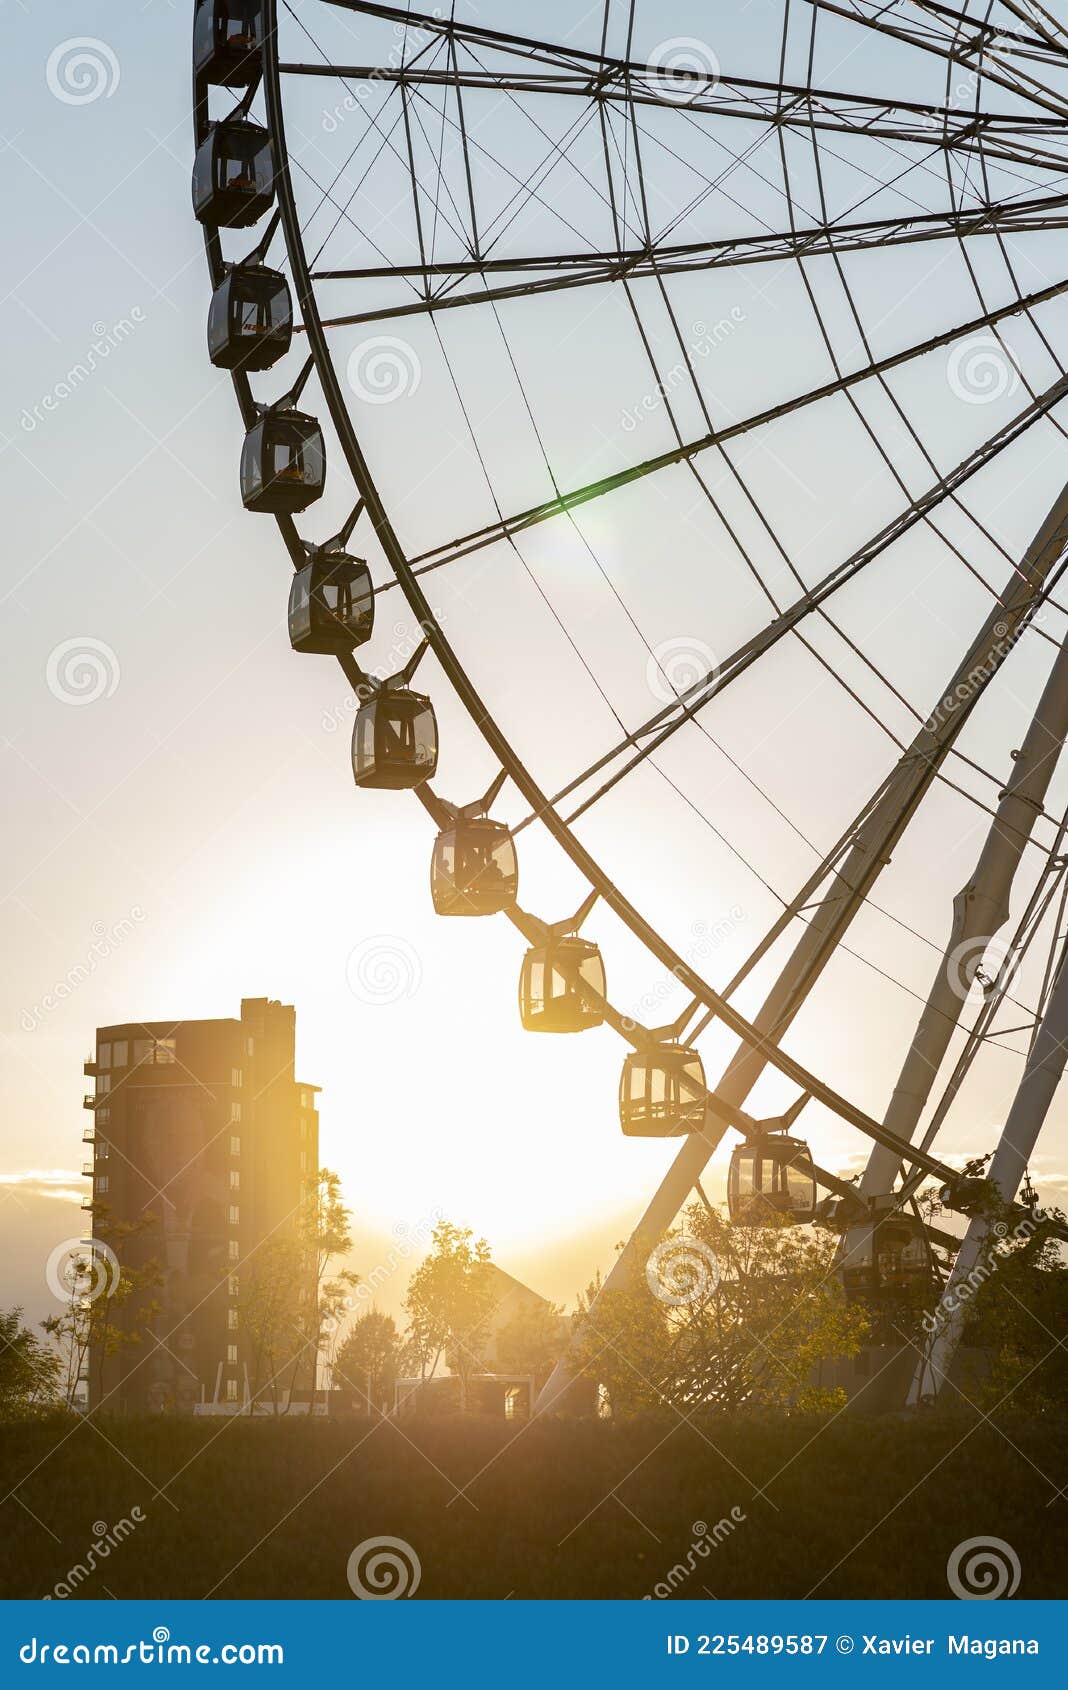 ferris wheel with the sunset behind